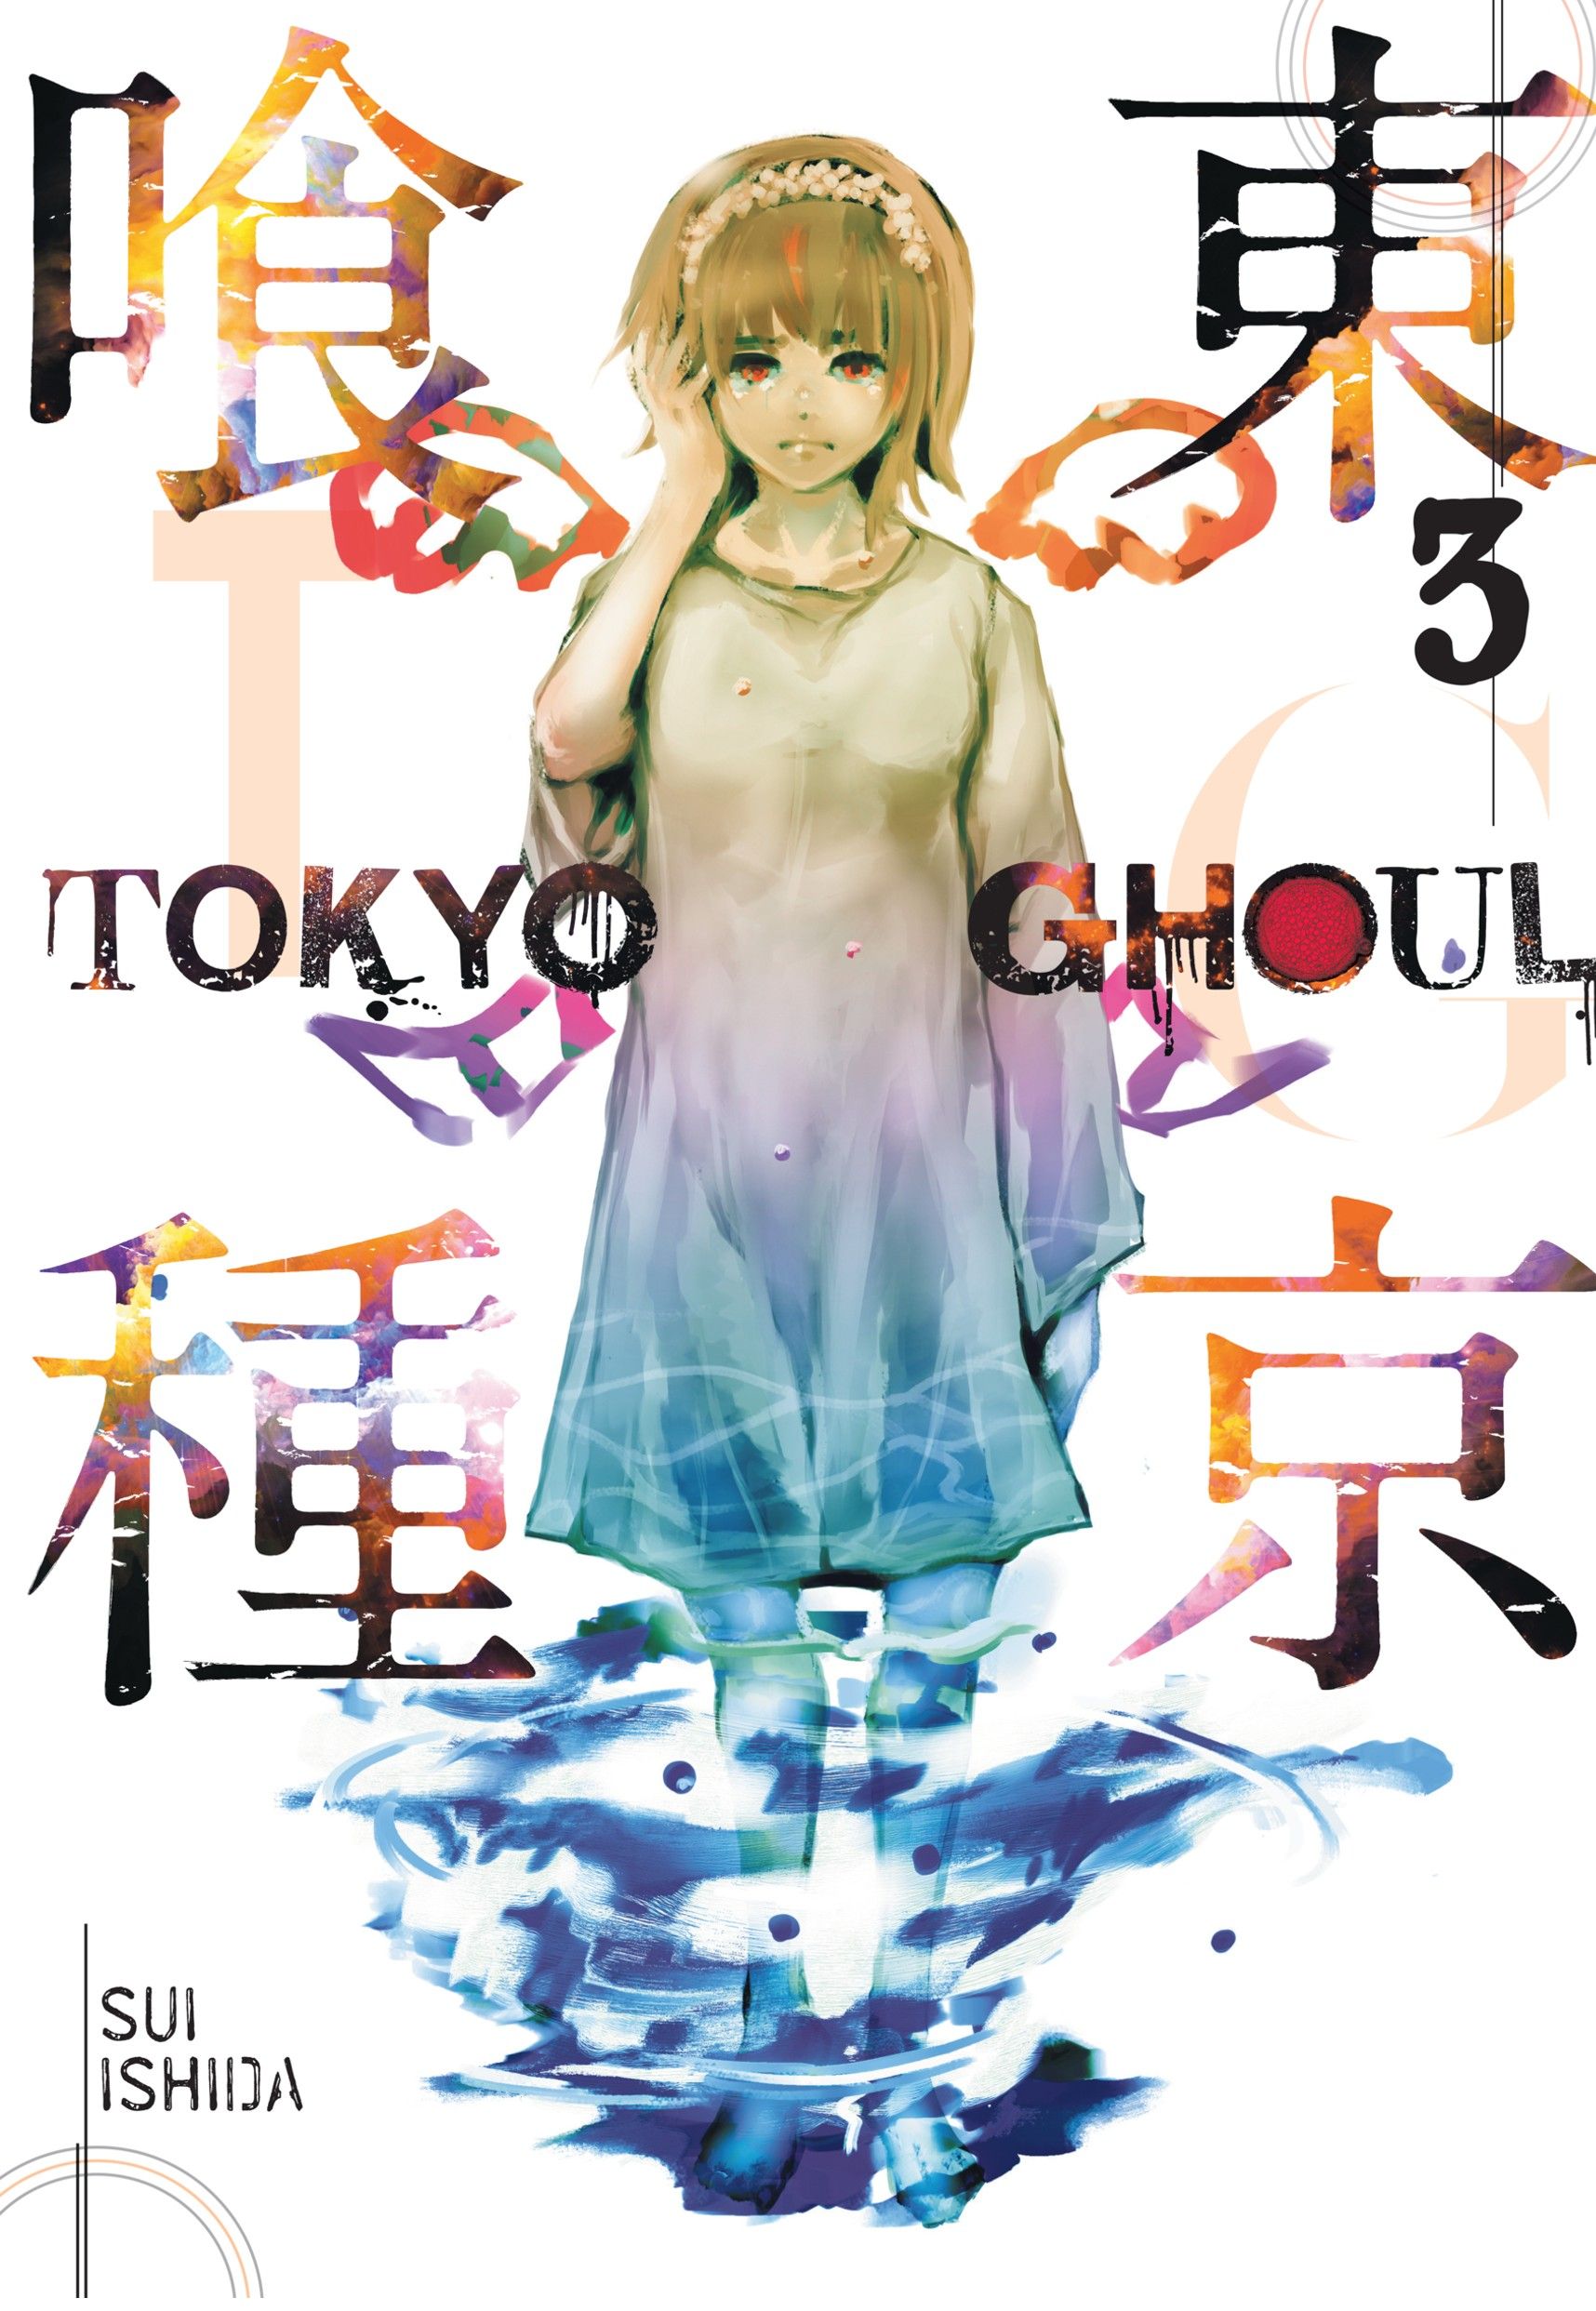 Tokyo Ghoul Volume 3 cover featuring Hinami standing